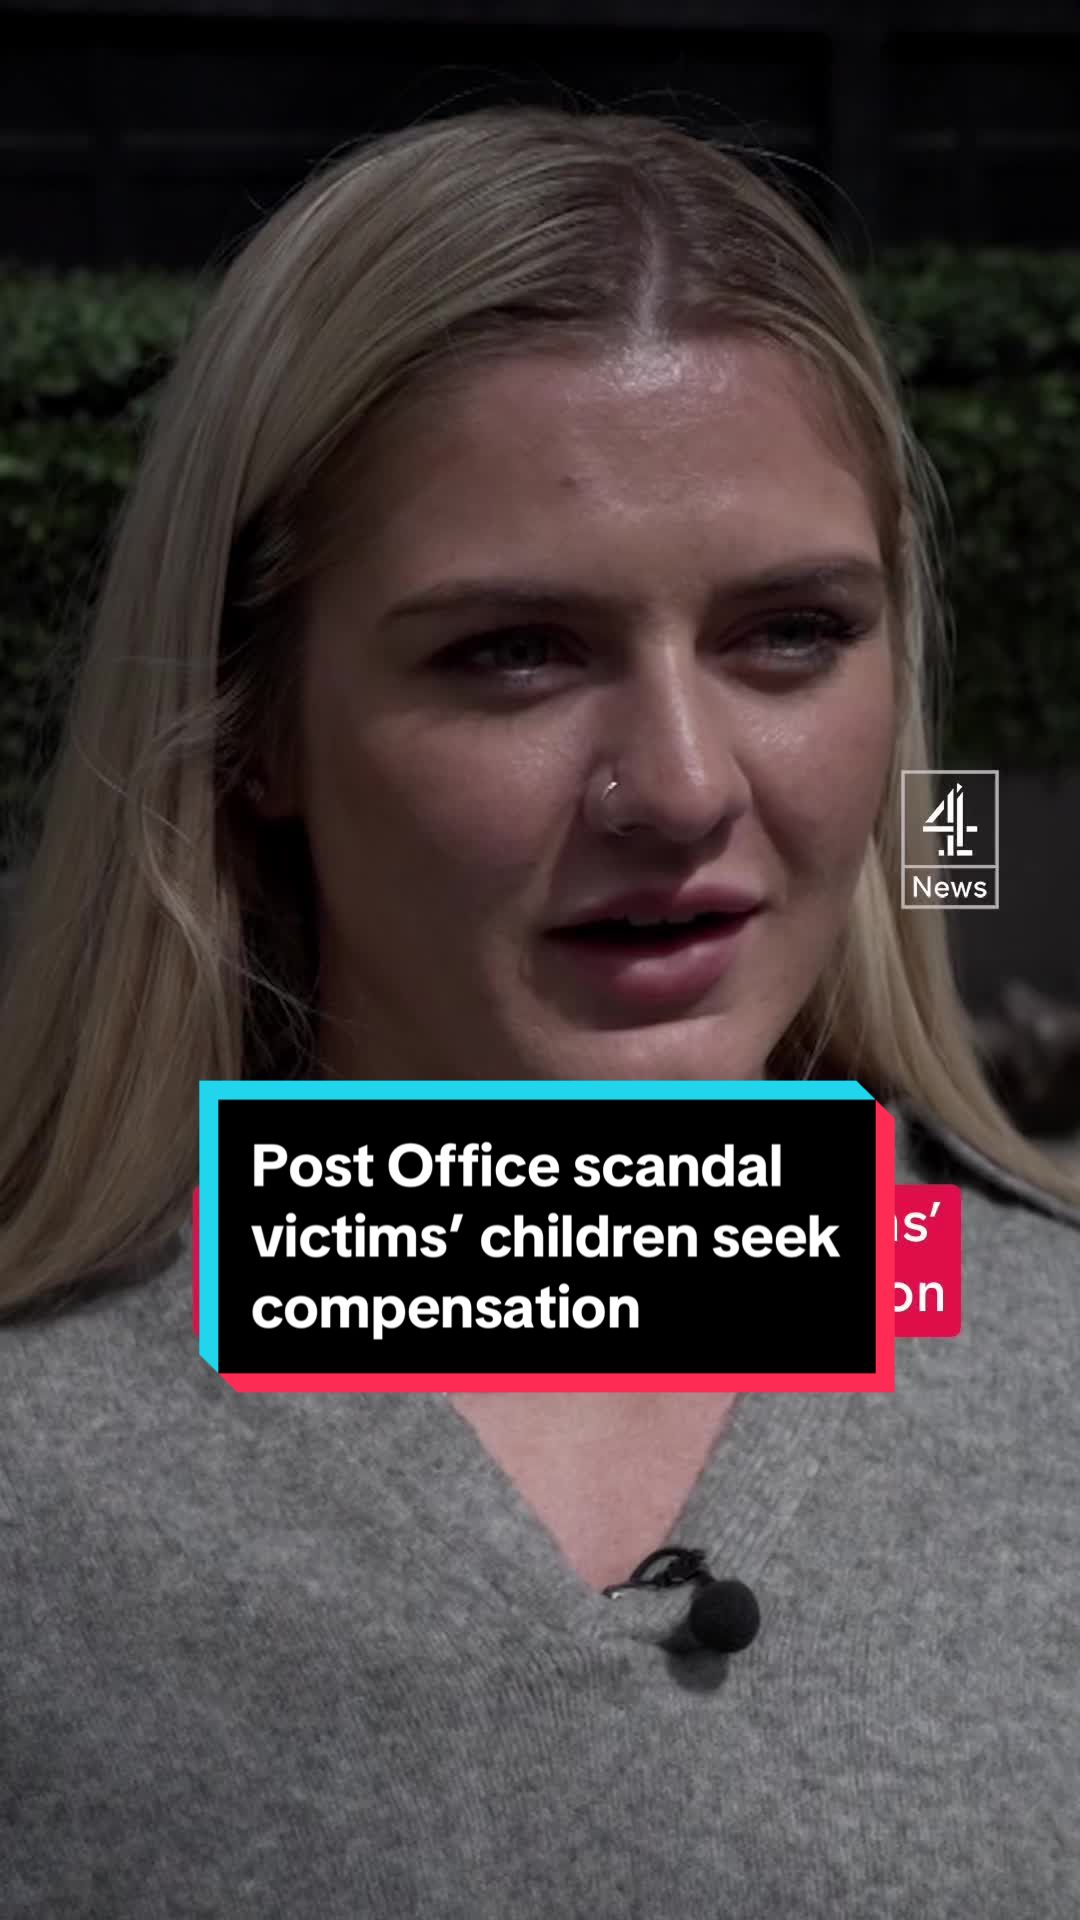 Daughter of former sub-postmaster Tony Downey, Katie, explains the strain her father’s wrongful conviction had on her family. She has set up the group Lost Chances for the Children of Sub-postmasters, to seek redress for the chances that were taken from them growing up. #PostOffice #HorizonScandal #c4news